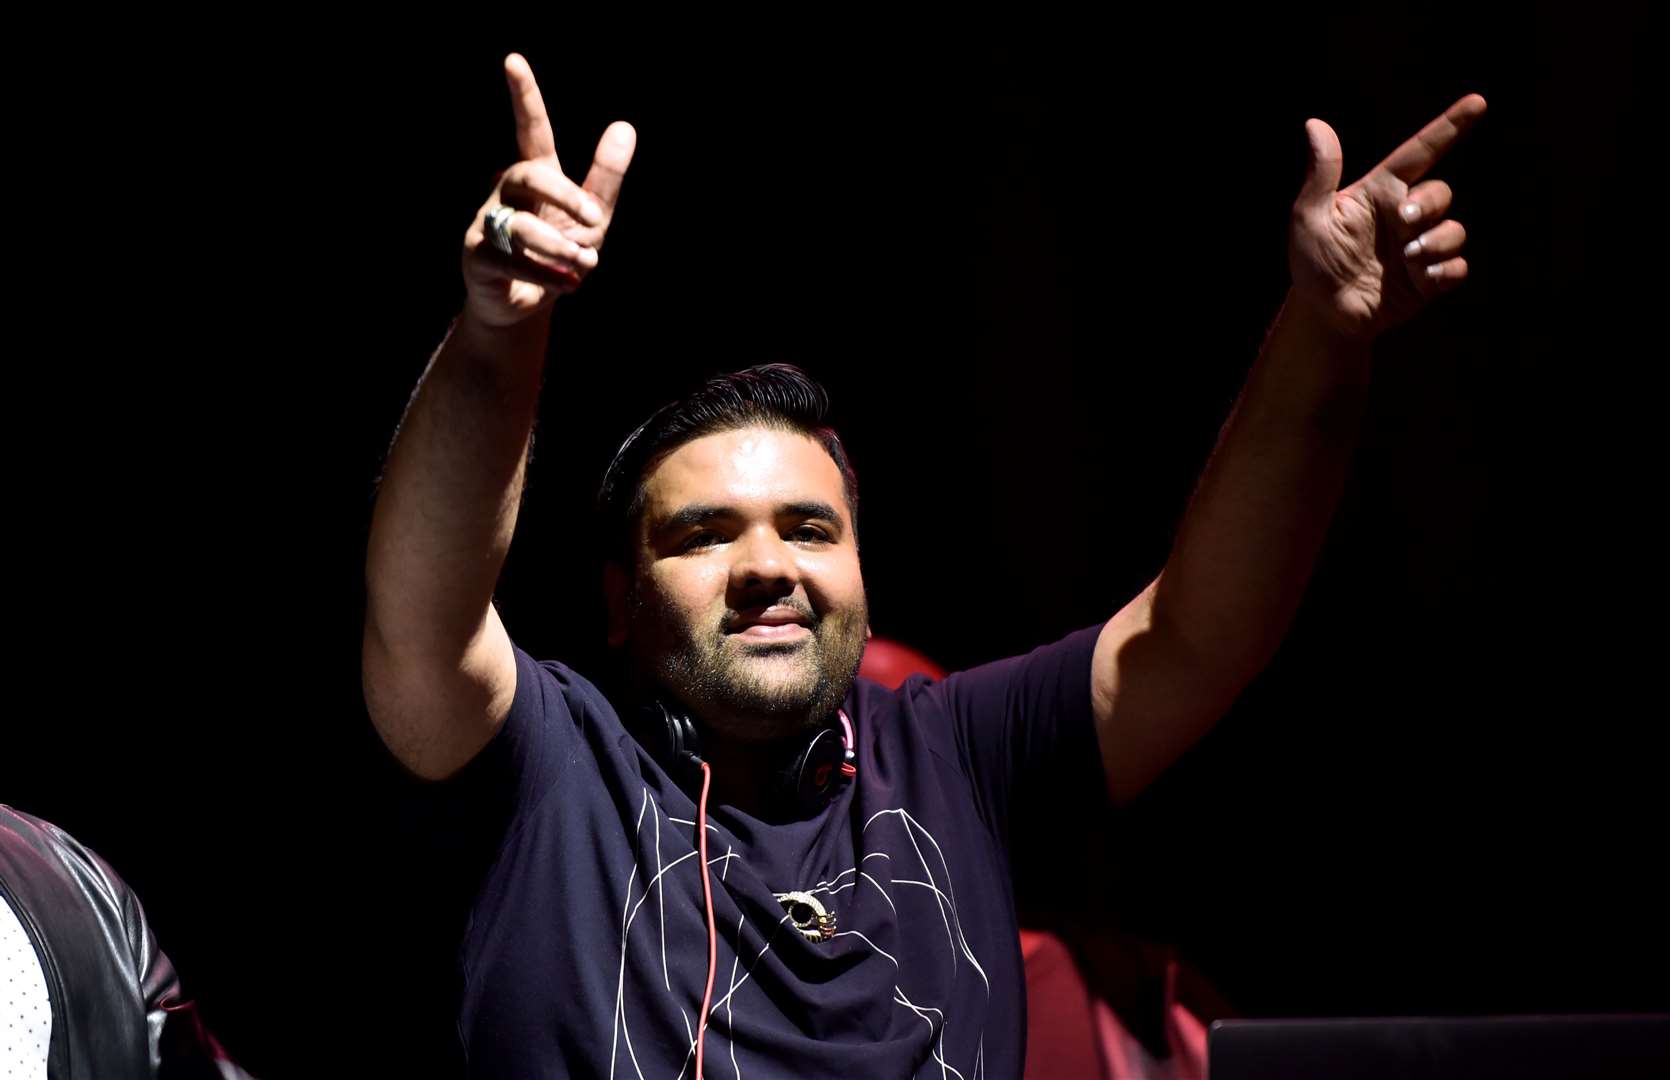 DJ Naughty Boy on stage at the Global Citizen Live event held at the 02 Brixton Academy (Matt Crossick/PA)